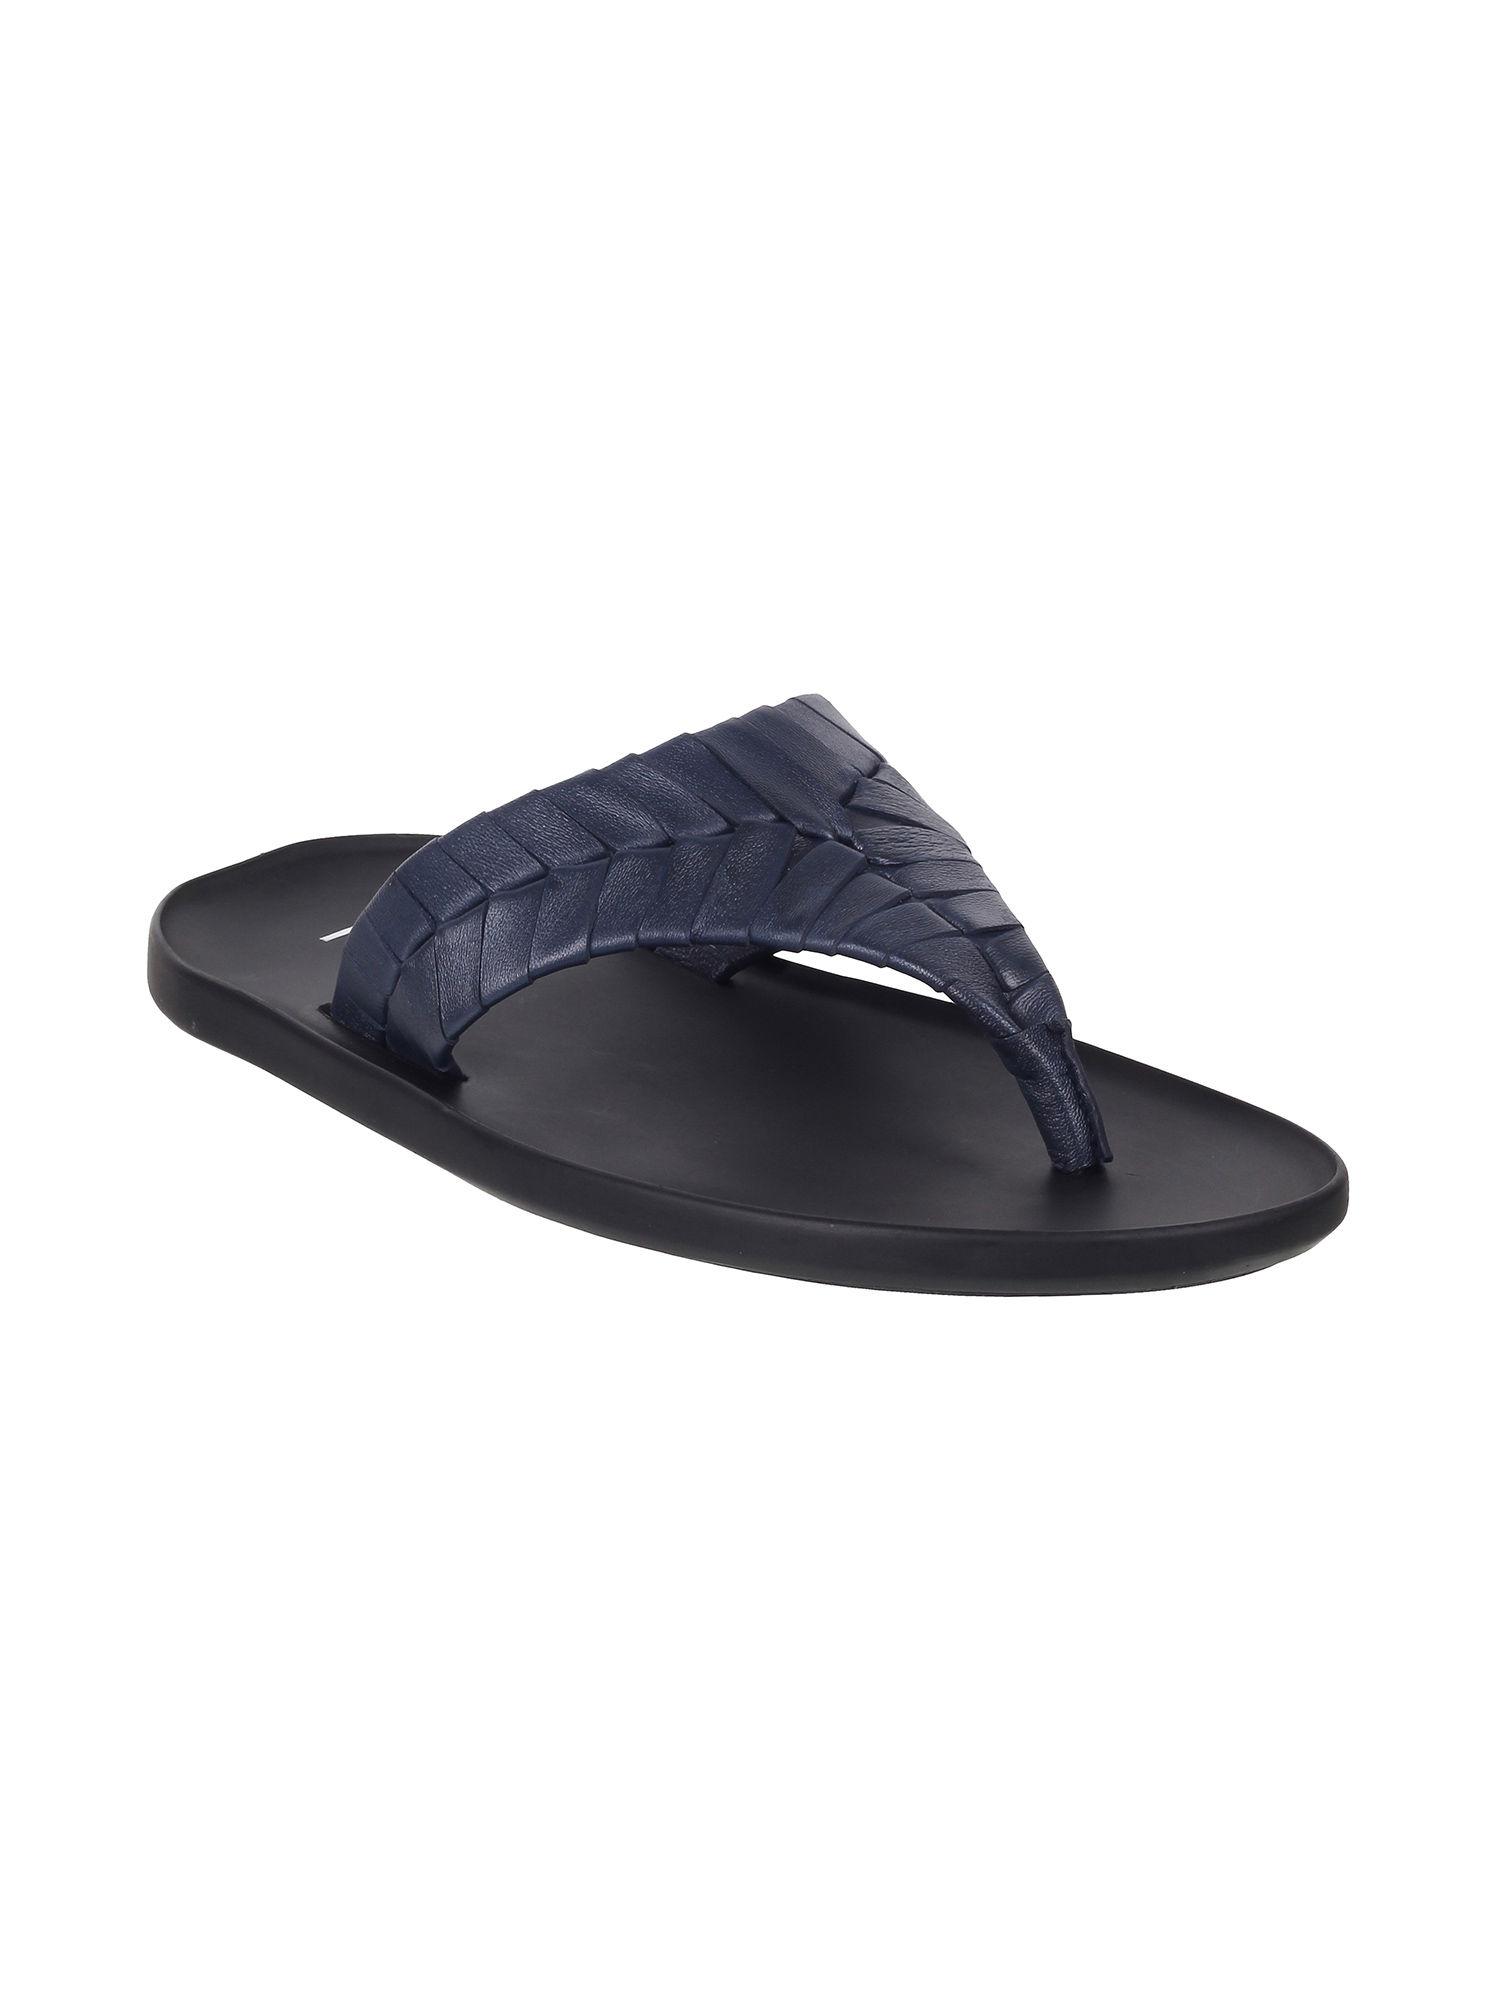 men-synthetic-navy-blue-slippers